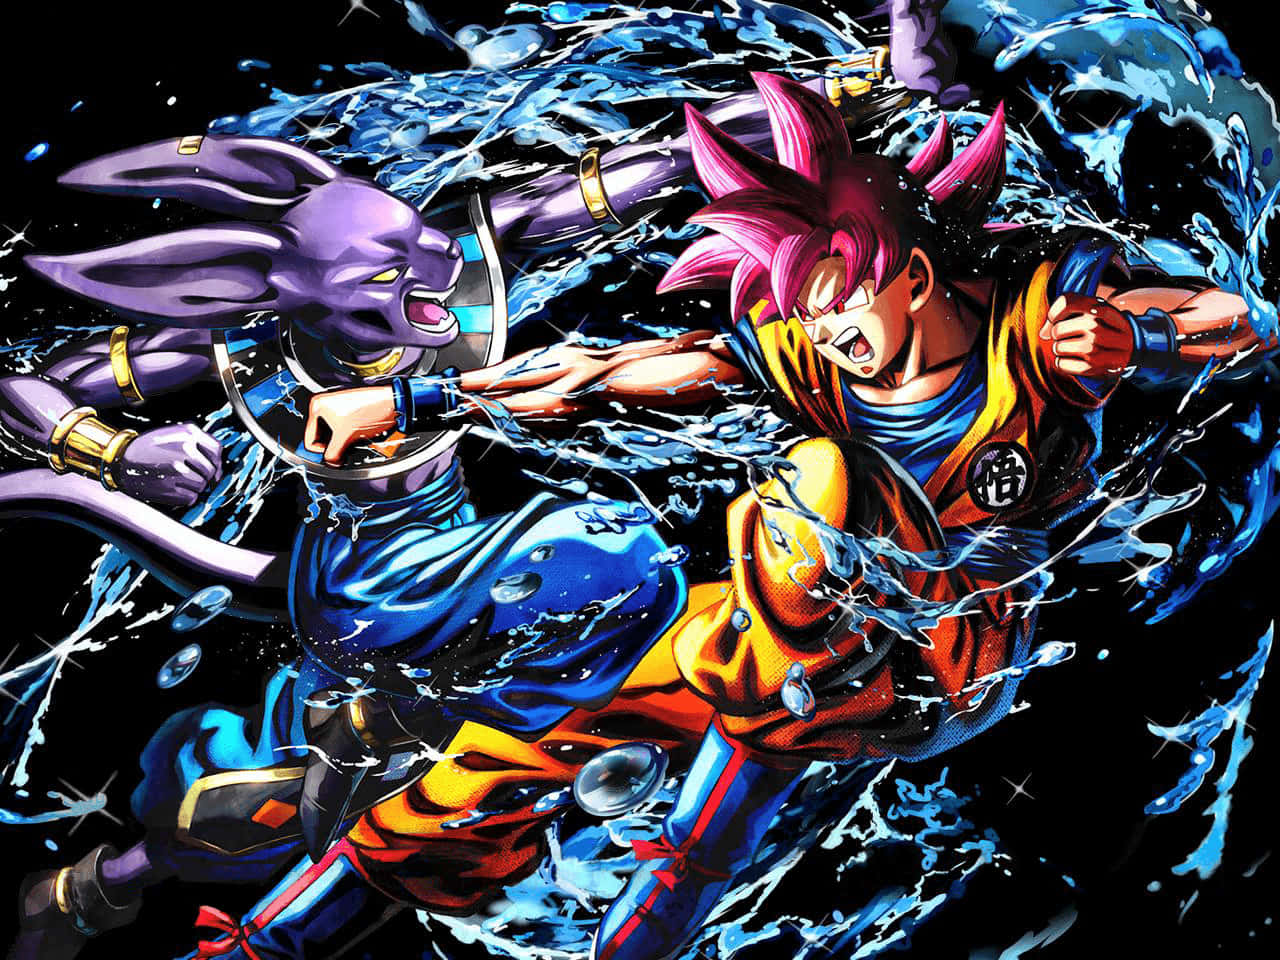 "Power to the Limit: Goku Fights Evil with Super Saiyan Strength" Wallpaper